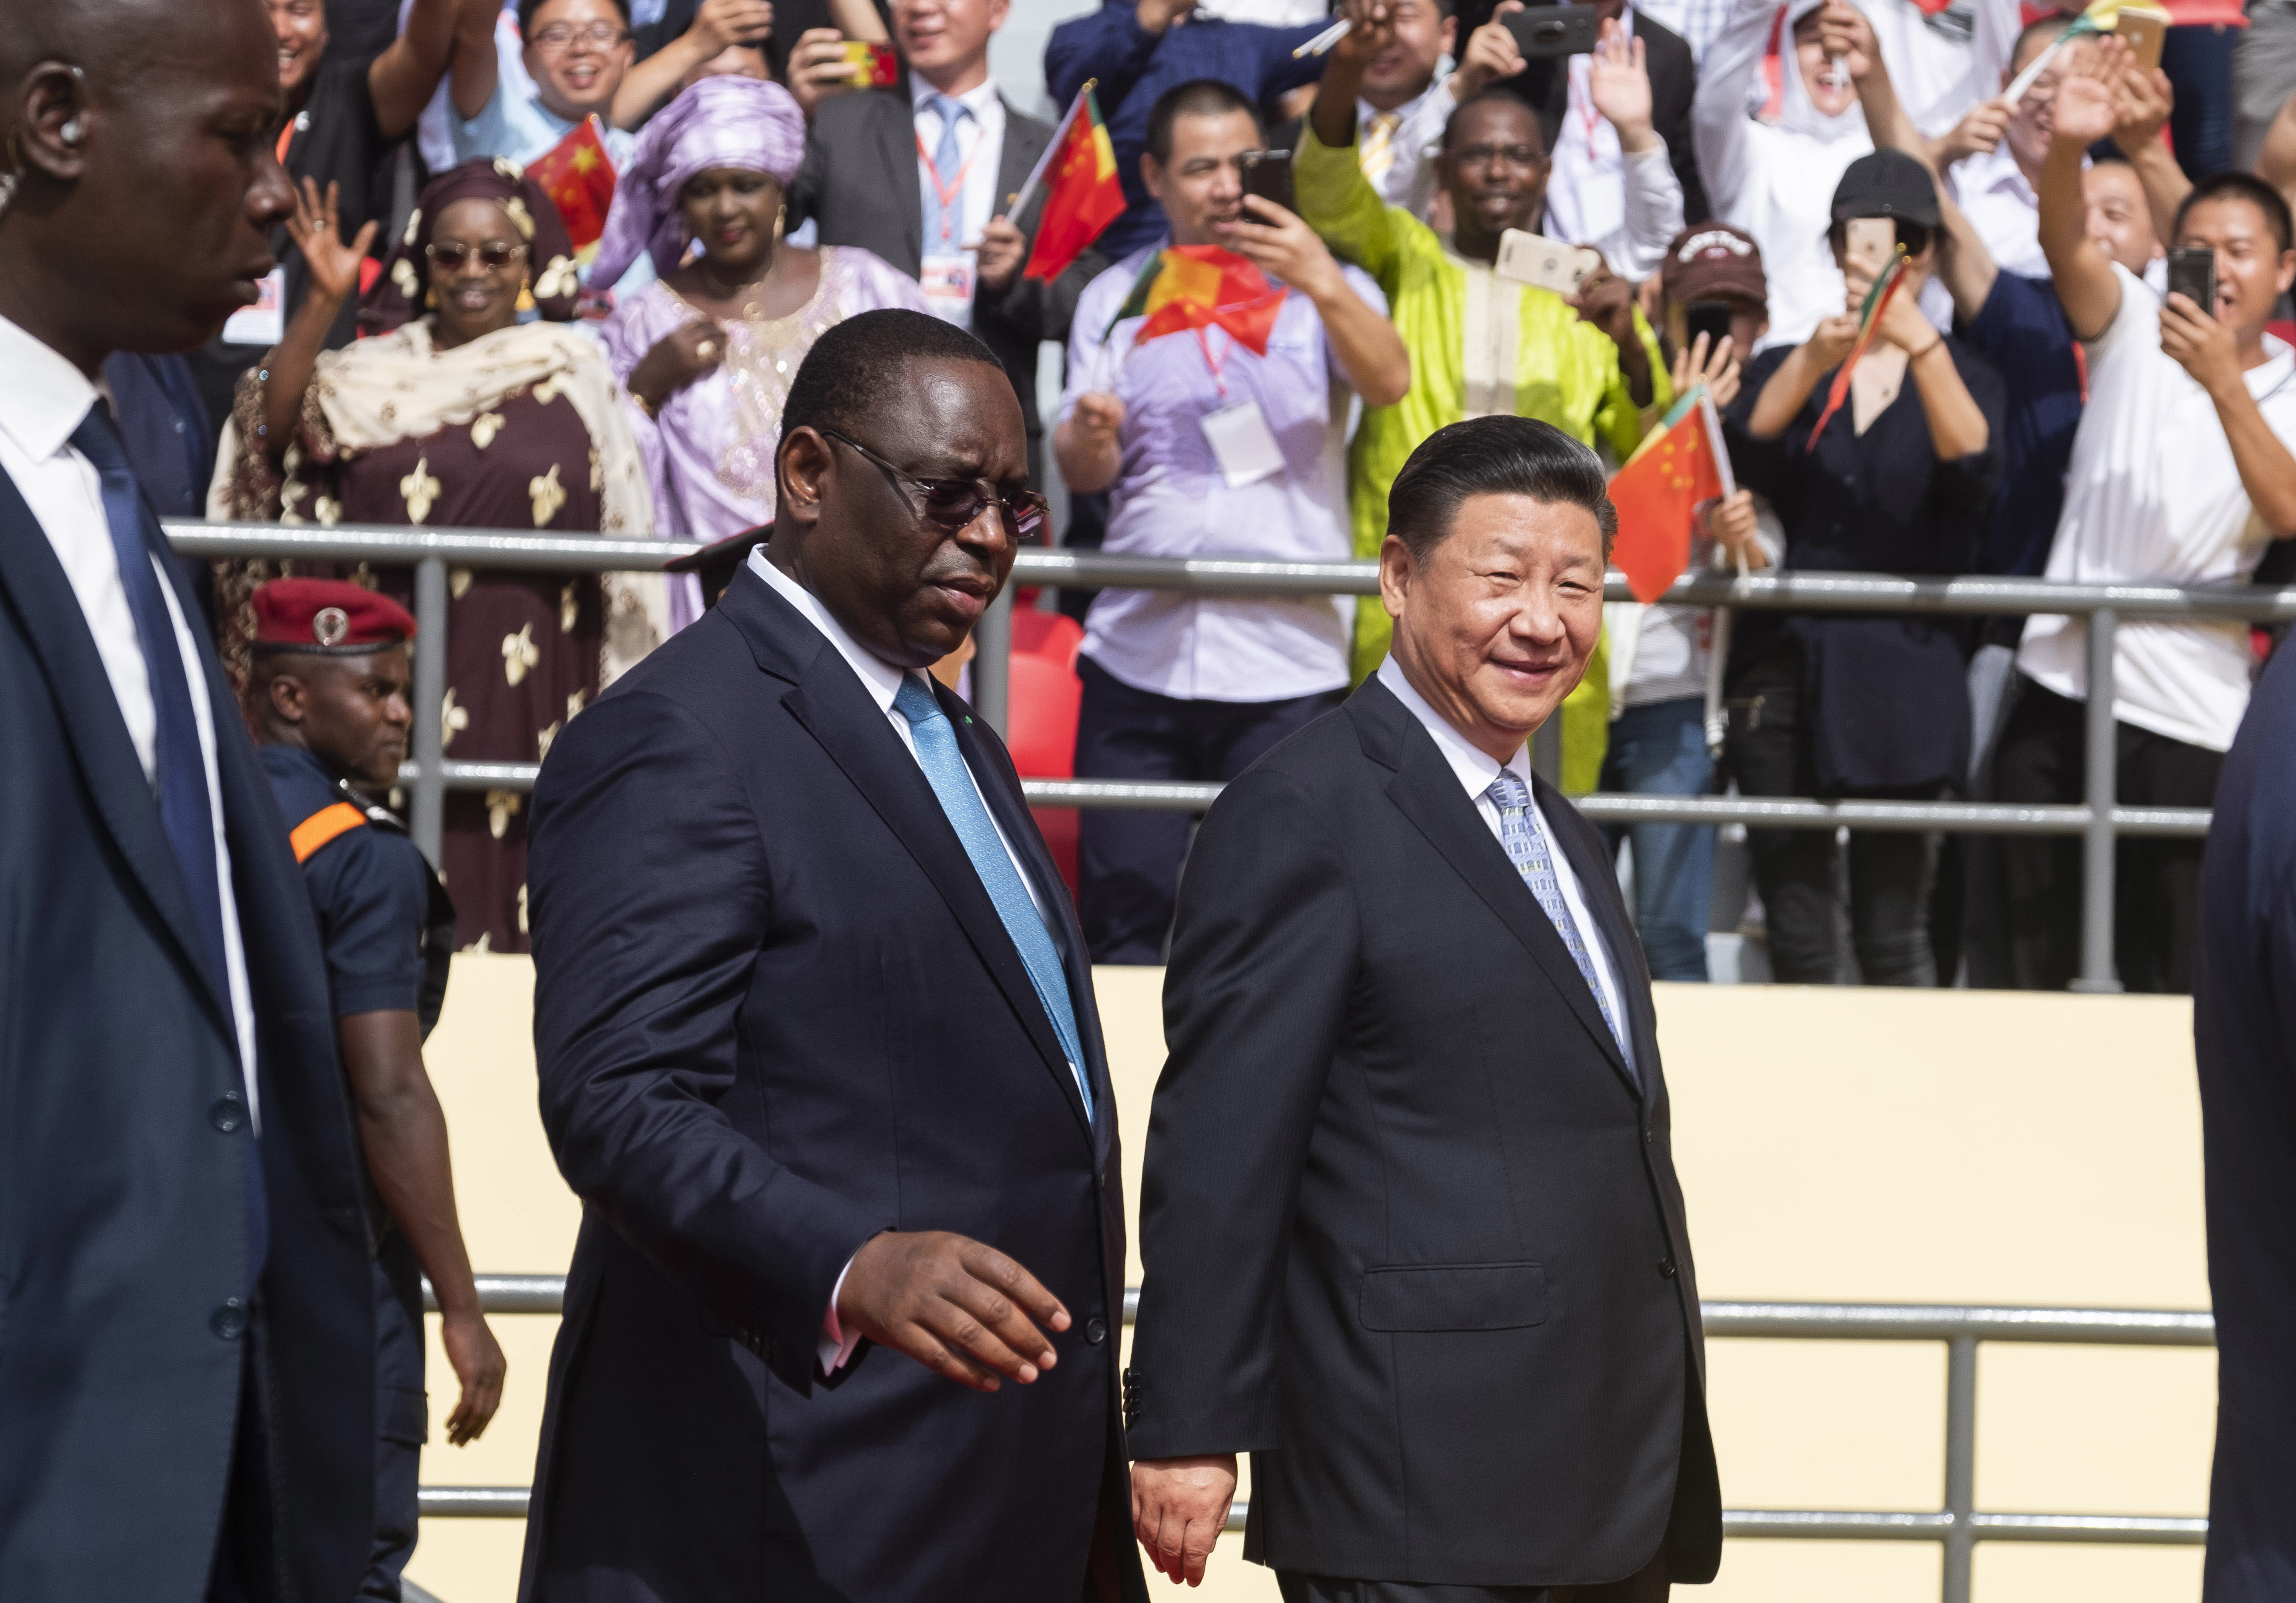 Chinese President Xi Jinping, right walks with Senegal's president Macky Sall during his state visit, in Dakar, Senegal, Sunday, July 22, 2018. Xi Jinping arrived in Africa on Saturday on a four-nation visit, seeking deeper military and economic ties. (AP Photo/Xaume Olleros)